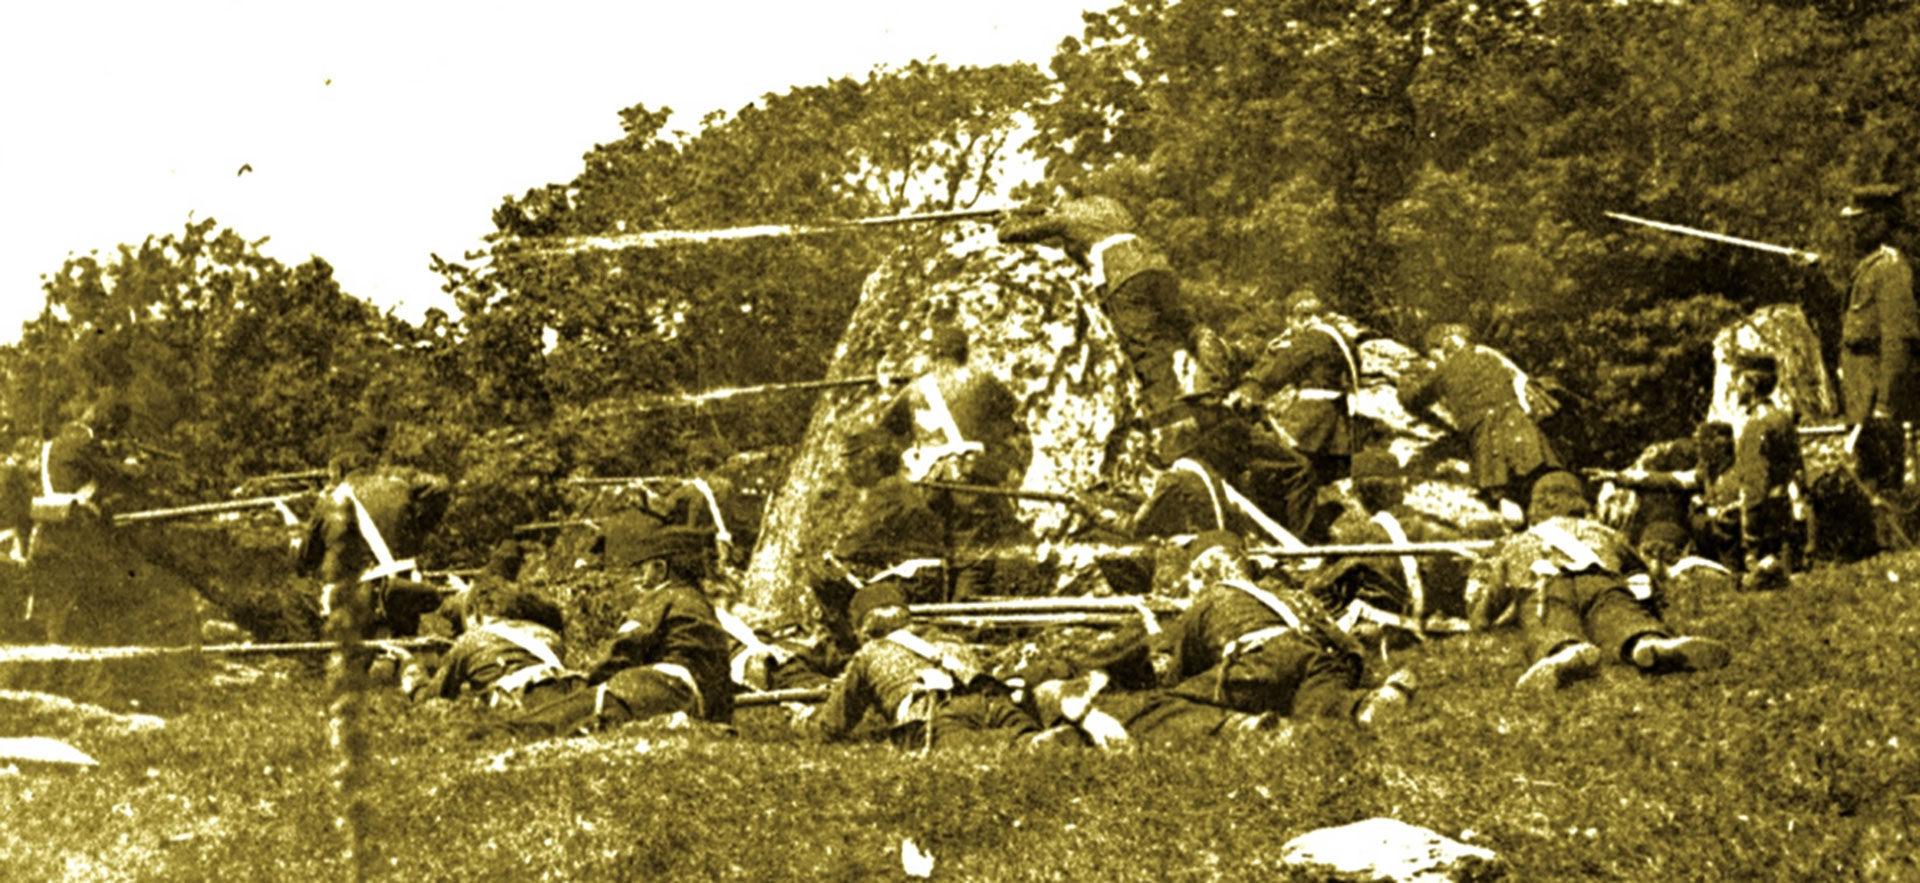 The scarlet-coated 60th Missisquoi Battalion of the Canadian militia re-created this scene for the camera after the battle, showing their use of cover when firing their Snider rifles at the pinned-down Fenians. Courtesy of Ross Jones.